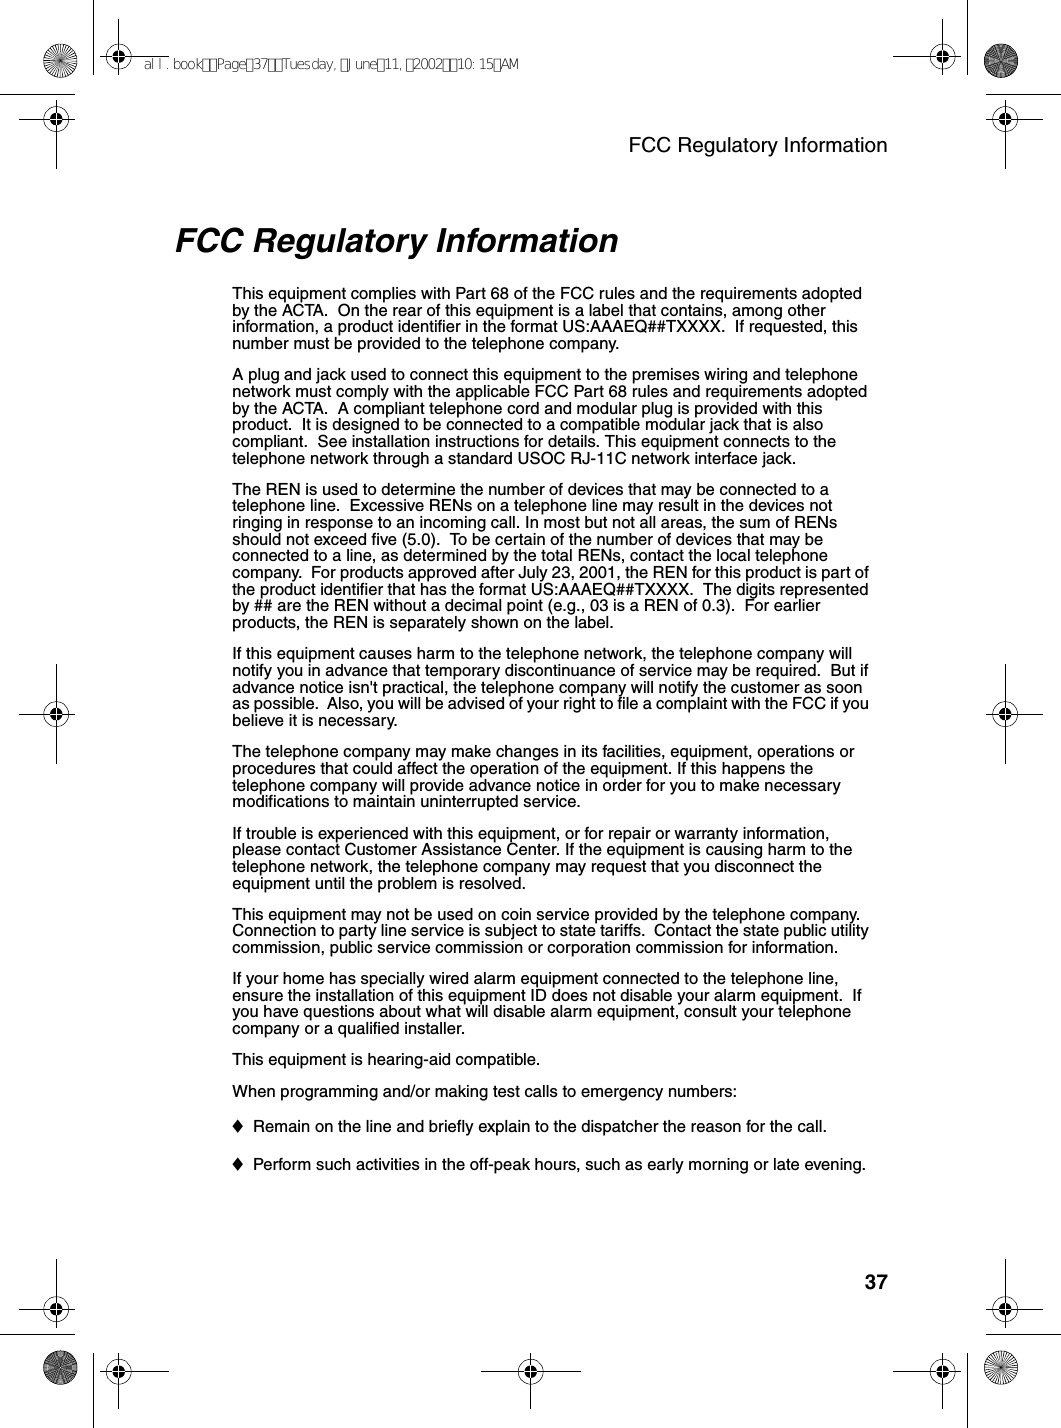 FCC Regulatory Information37FCC Regulatory InformationThis equipment complies with Part 68 of the FCC rules and the requirements adopted by the ACTA.  On the rear of this equipment is a label that contains, among other information, a product identifier in the format US:AAAEQ##TXXXX.  If requested, this number must be provided to the telephone company. A plug and jack used to connect this equipment to the premises wiring and telephone network must comply with the applicable FCC Part 68 rules and requirements adopted by the ACTA.  A compliant telephone cord and modular plug is provided with this product.  It is designed to be connected to a compatible modular jack that is also compliant.  See installation instructions for details. This equipment connects to the telephone network through a standard USOC RJ-11C network interface jack. The REN is used to determine the number of devices that may be connected to a telephone line.  Excessive RENs on a telephone line may result in the devices not ringing in response to an incoming call. In most but not all areas, the sum of RENs should not exceed five (5.0).  To be certain of the number of devices that may be connected to a line, as determined by the total RENs, contact the local telephone company.  For products approved after July 23, 2001, the REN for this product is part of the product identifier that has the format US:AAAEQ##TXXXX.  The digits represented by ## are the REN without a decimal point (e.g., 03 is a REN of 0.3).  For earlier products, the REN is separately shown on the label. If this equipment causes harm to the telephone network, the telephone company will notify you in advance that temporary discontinuance of service may be required.  But if advance notice isn&apos;t practical, the telephone company will notify the customer as soon as possible.  Also, you will be advised of your right to file a complaint with the FCC if you believe it is necessary. The telephone company may make changes in its facilities, equipment, operations or procedures that could affect the operation of the equipment. If this happens the telephone company will provide advance notice in order for you to make necessary modifications to maintain uninterrupted service. If trouble is experienced with this equipment, or for repair or warranty information, please contact Customer Assistance Center. If the equipment is causing harm to the telephone network, the telephone company may request that you disconnect the equipment until the problem is resolved.This equipment may not be used on coin service provided by the telephone company. Connection to party line service is subject to state tariffs.  Contact the state public utility commission, public service commission or corporation commission for information. If your home has specially wired alarm equipment connected to the telephone line, ensure the installation of this equipment ID does not disable your alarm equipment.  If you have questions about what will disable alarm equipment, consult your telephone company or a qualified installer.This equipment is hearing-aid compatible. When programming and/or making test calls to emergency numbers: ♦Remain on the line and briefly explain to the dispatcher the reason for the call. ♦Perform such activities in the off-peak hours, such as early morning or late evening. all.bookPage37Tuesday,June11,200210:15AM